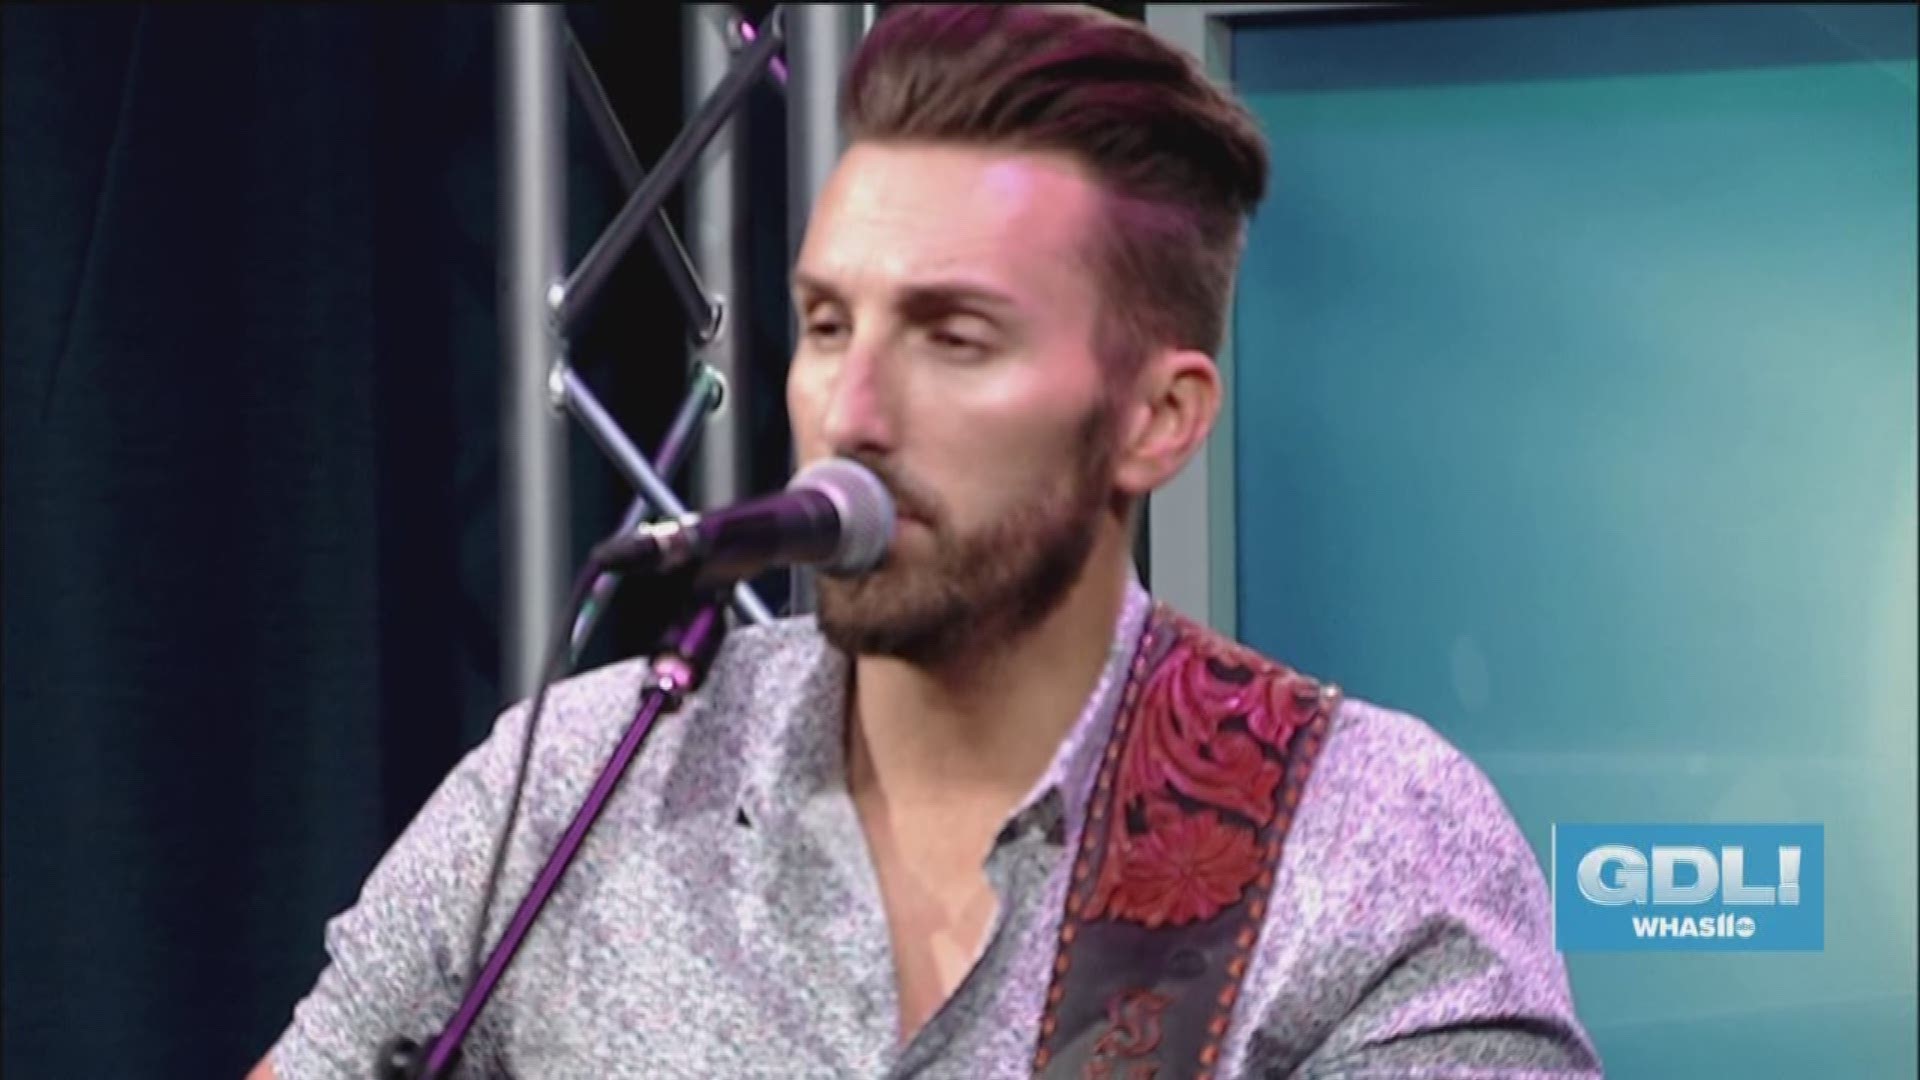 JD Shelburne stopped by Great Day Live to Perform a couple of his songs.